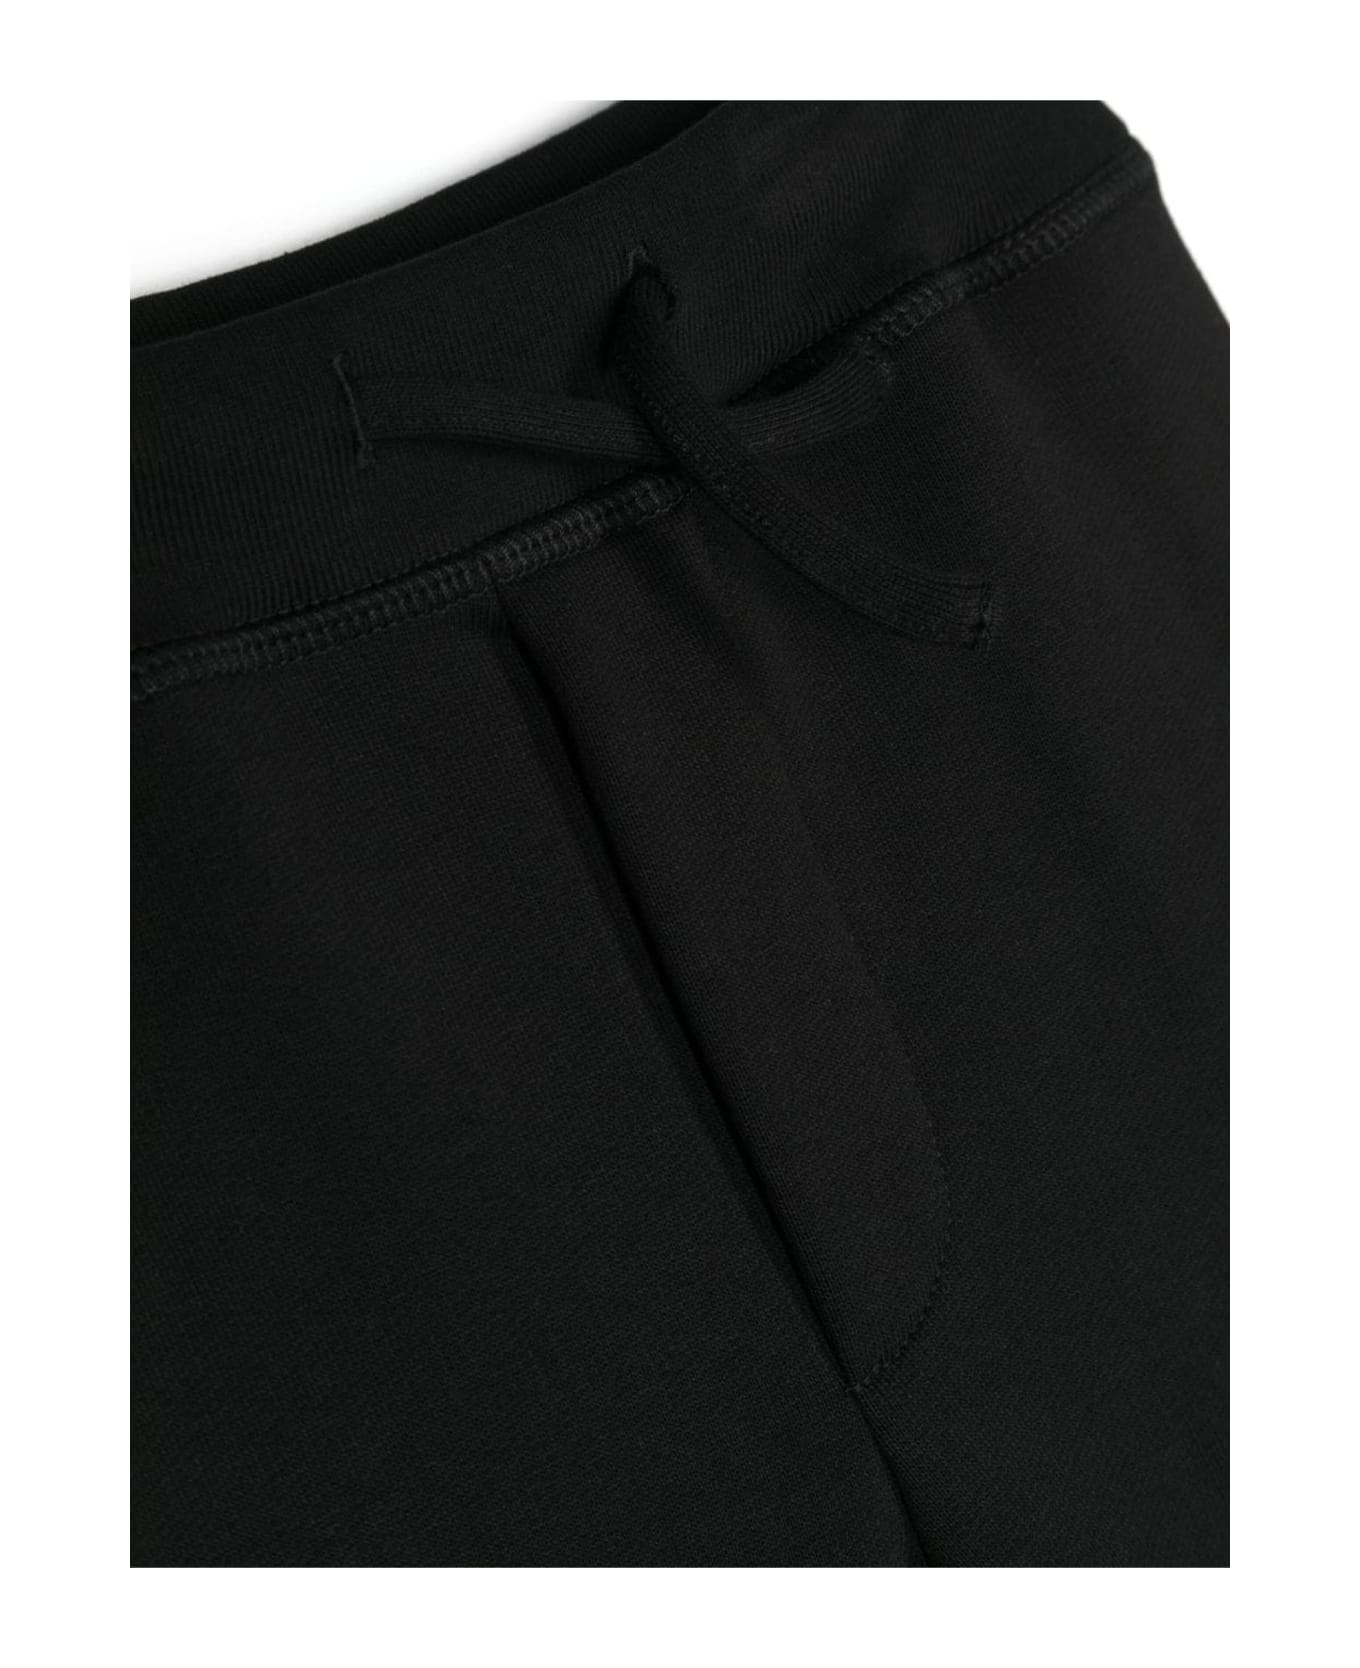 Dsquared2 Trousers Black - Black ボトムス